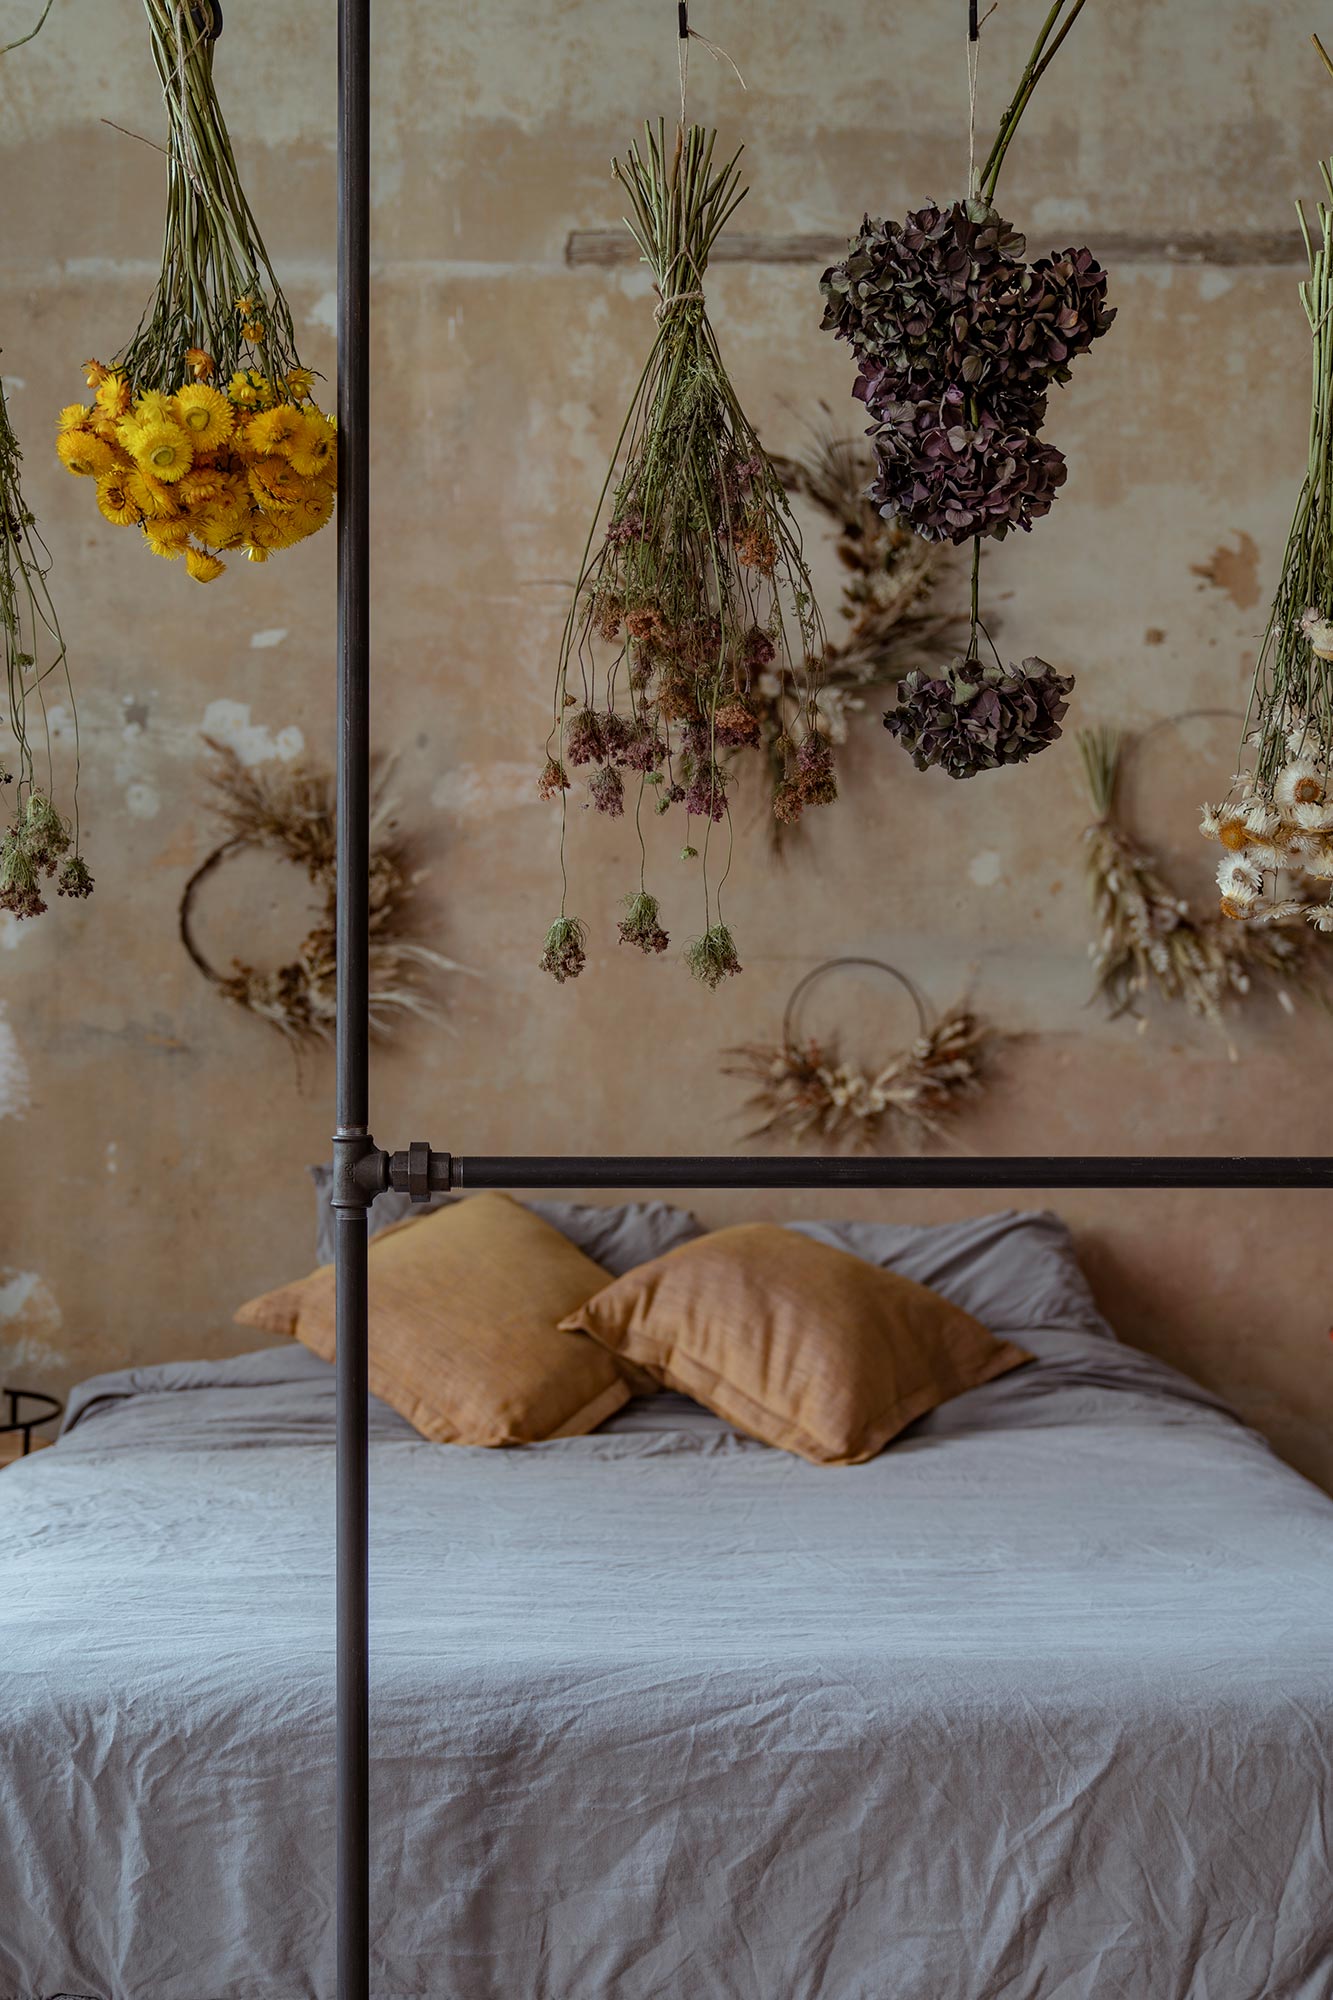 Bedroom with dried flowers